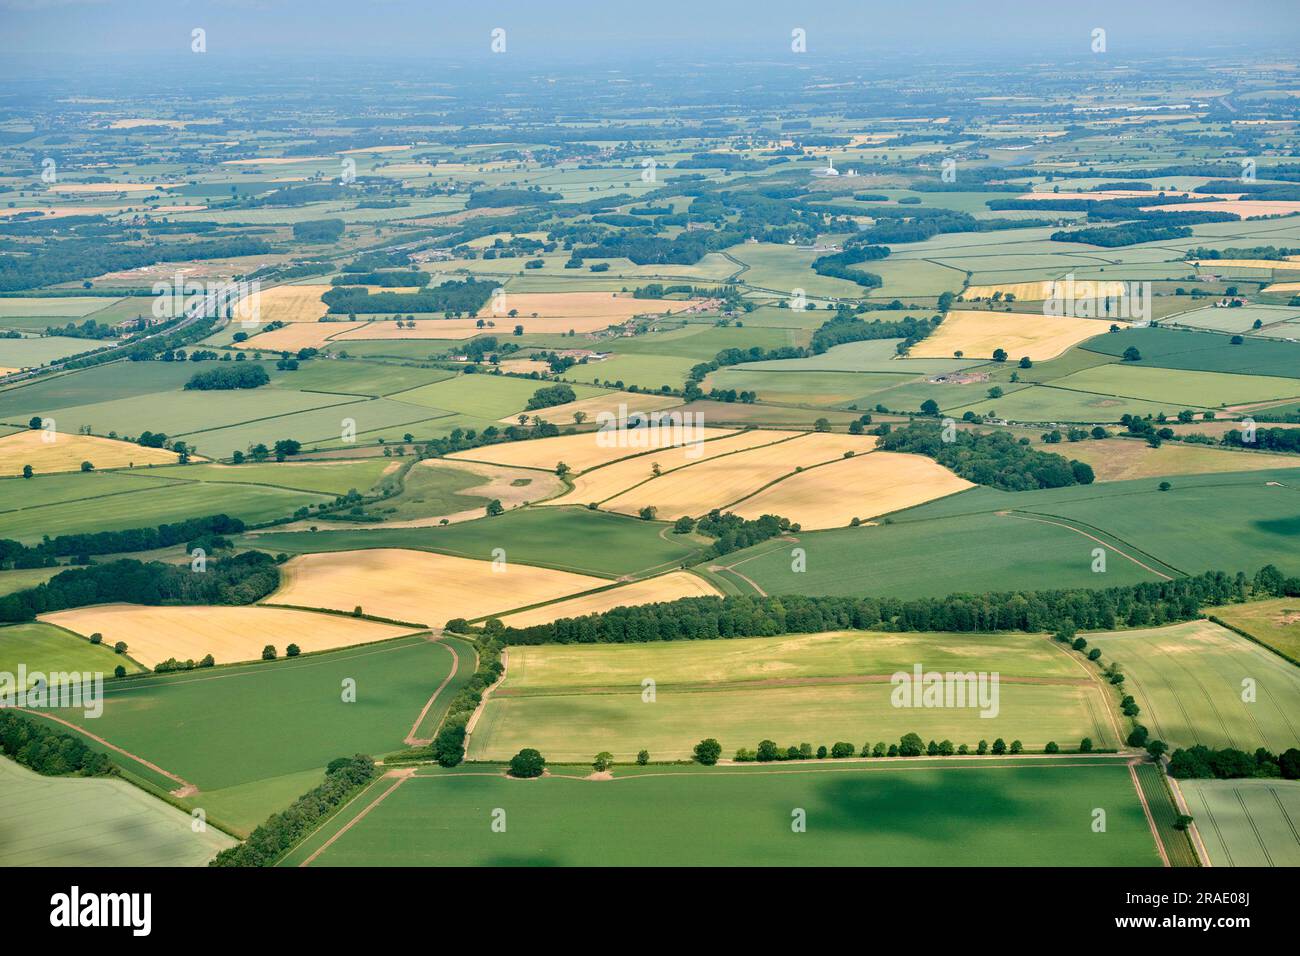 From the air, British rural landscape showing field patterns and crops ready for harvest, North Yorkshire, Northern England, UK Stock Photo